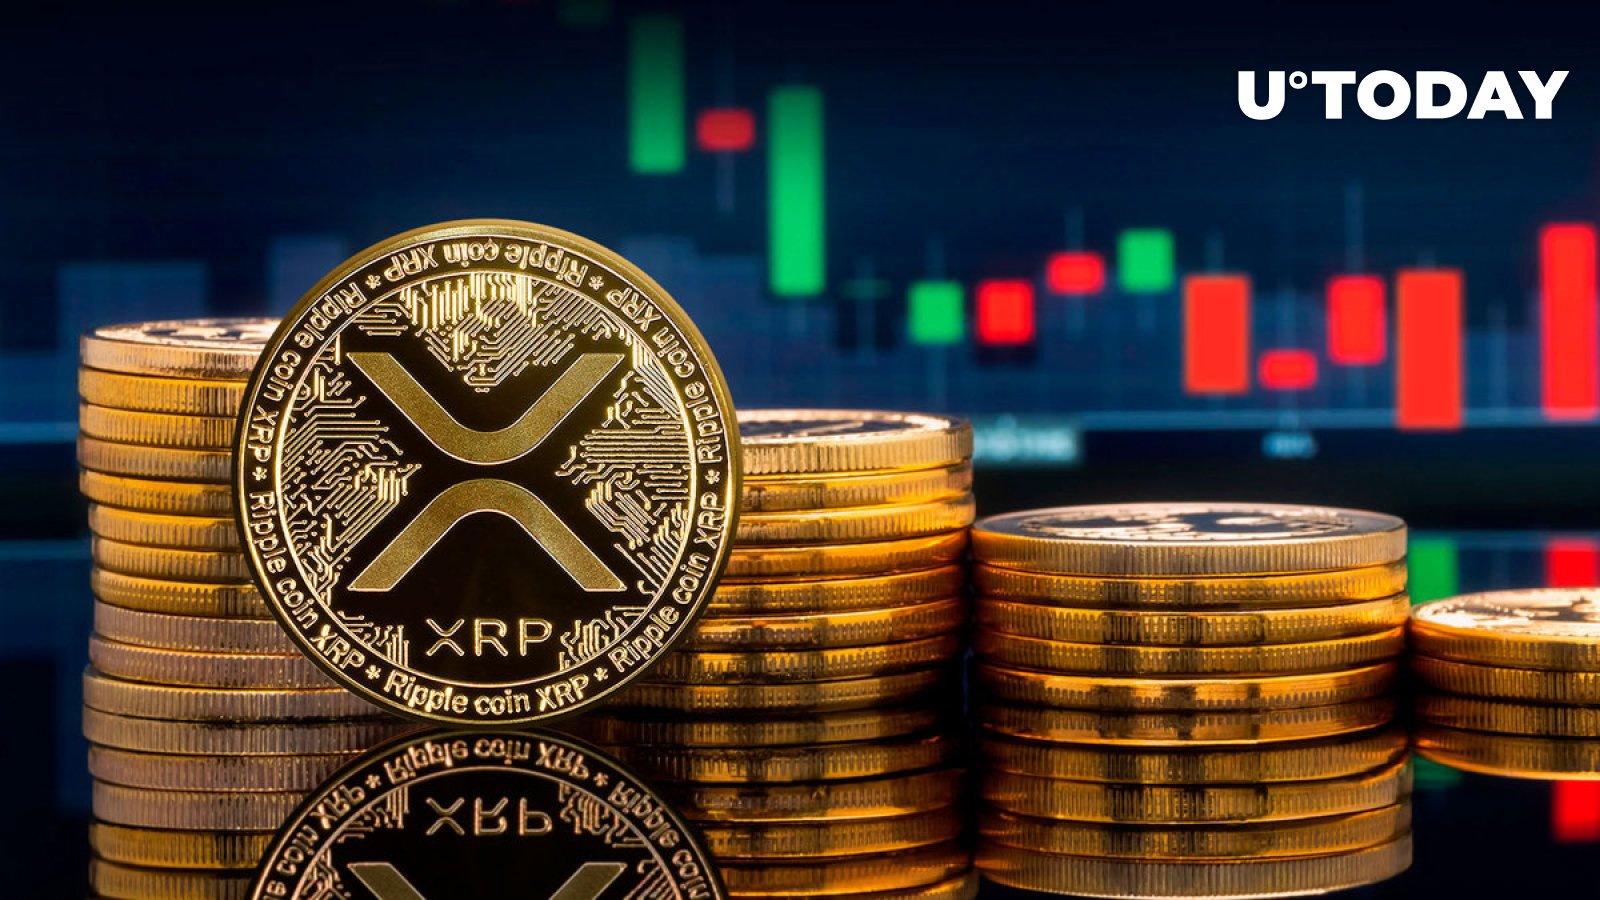 What’s Next for XRP Price? Analyst Shares Surprising Prediction